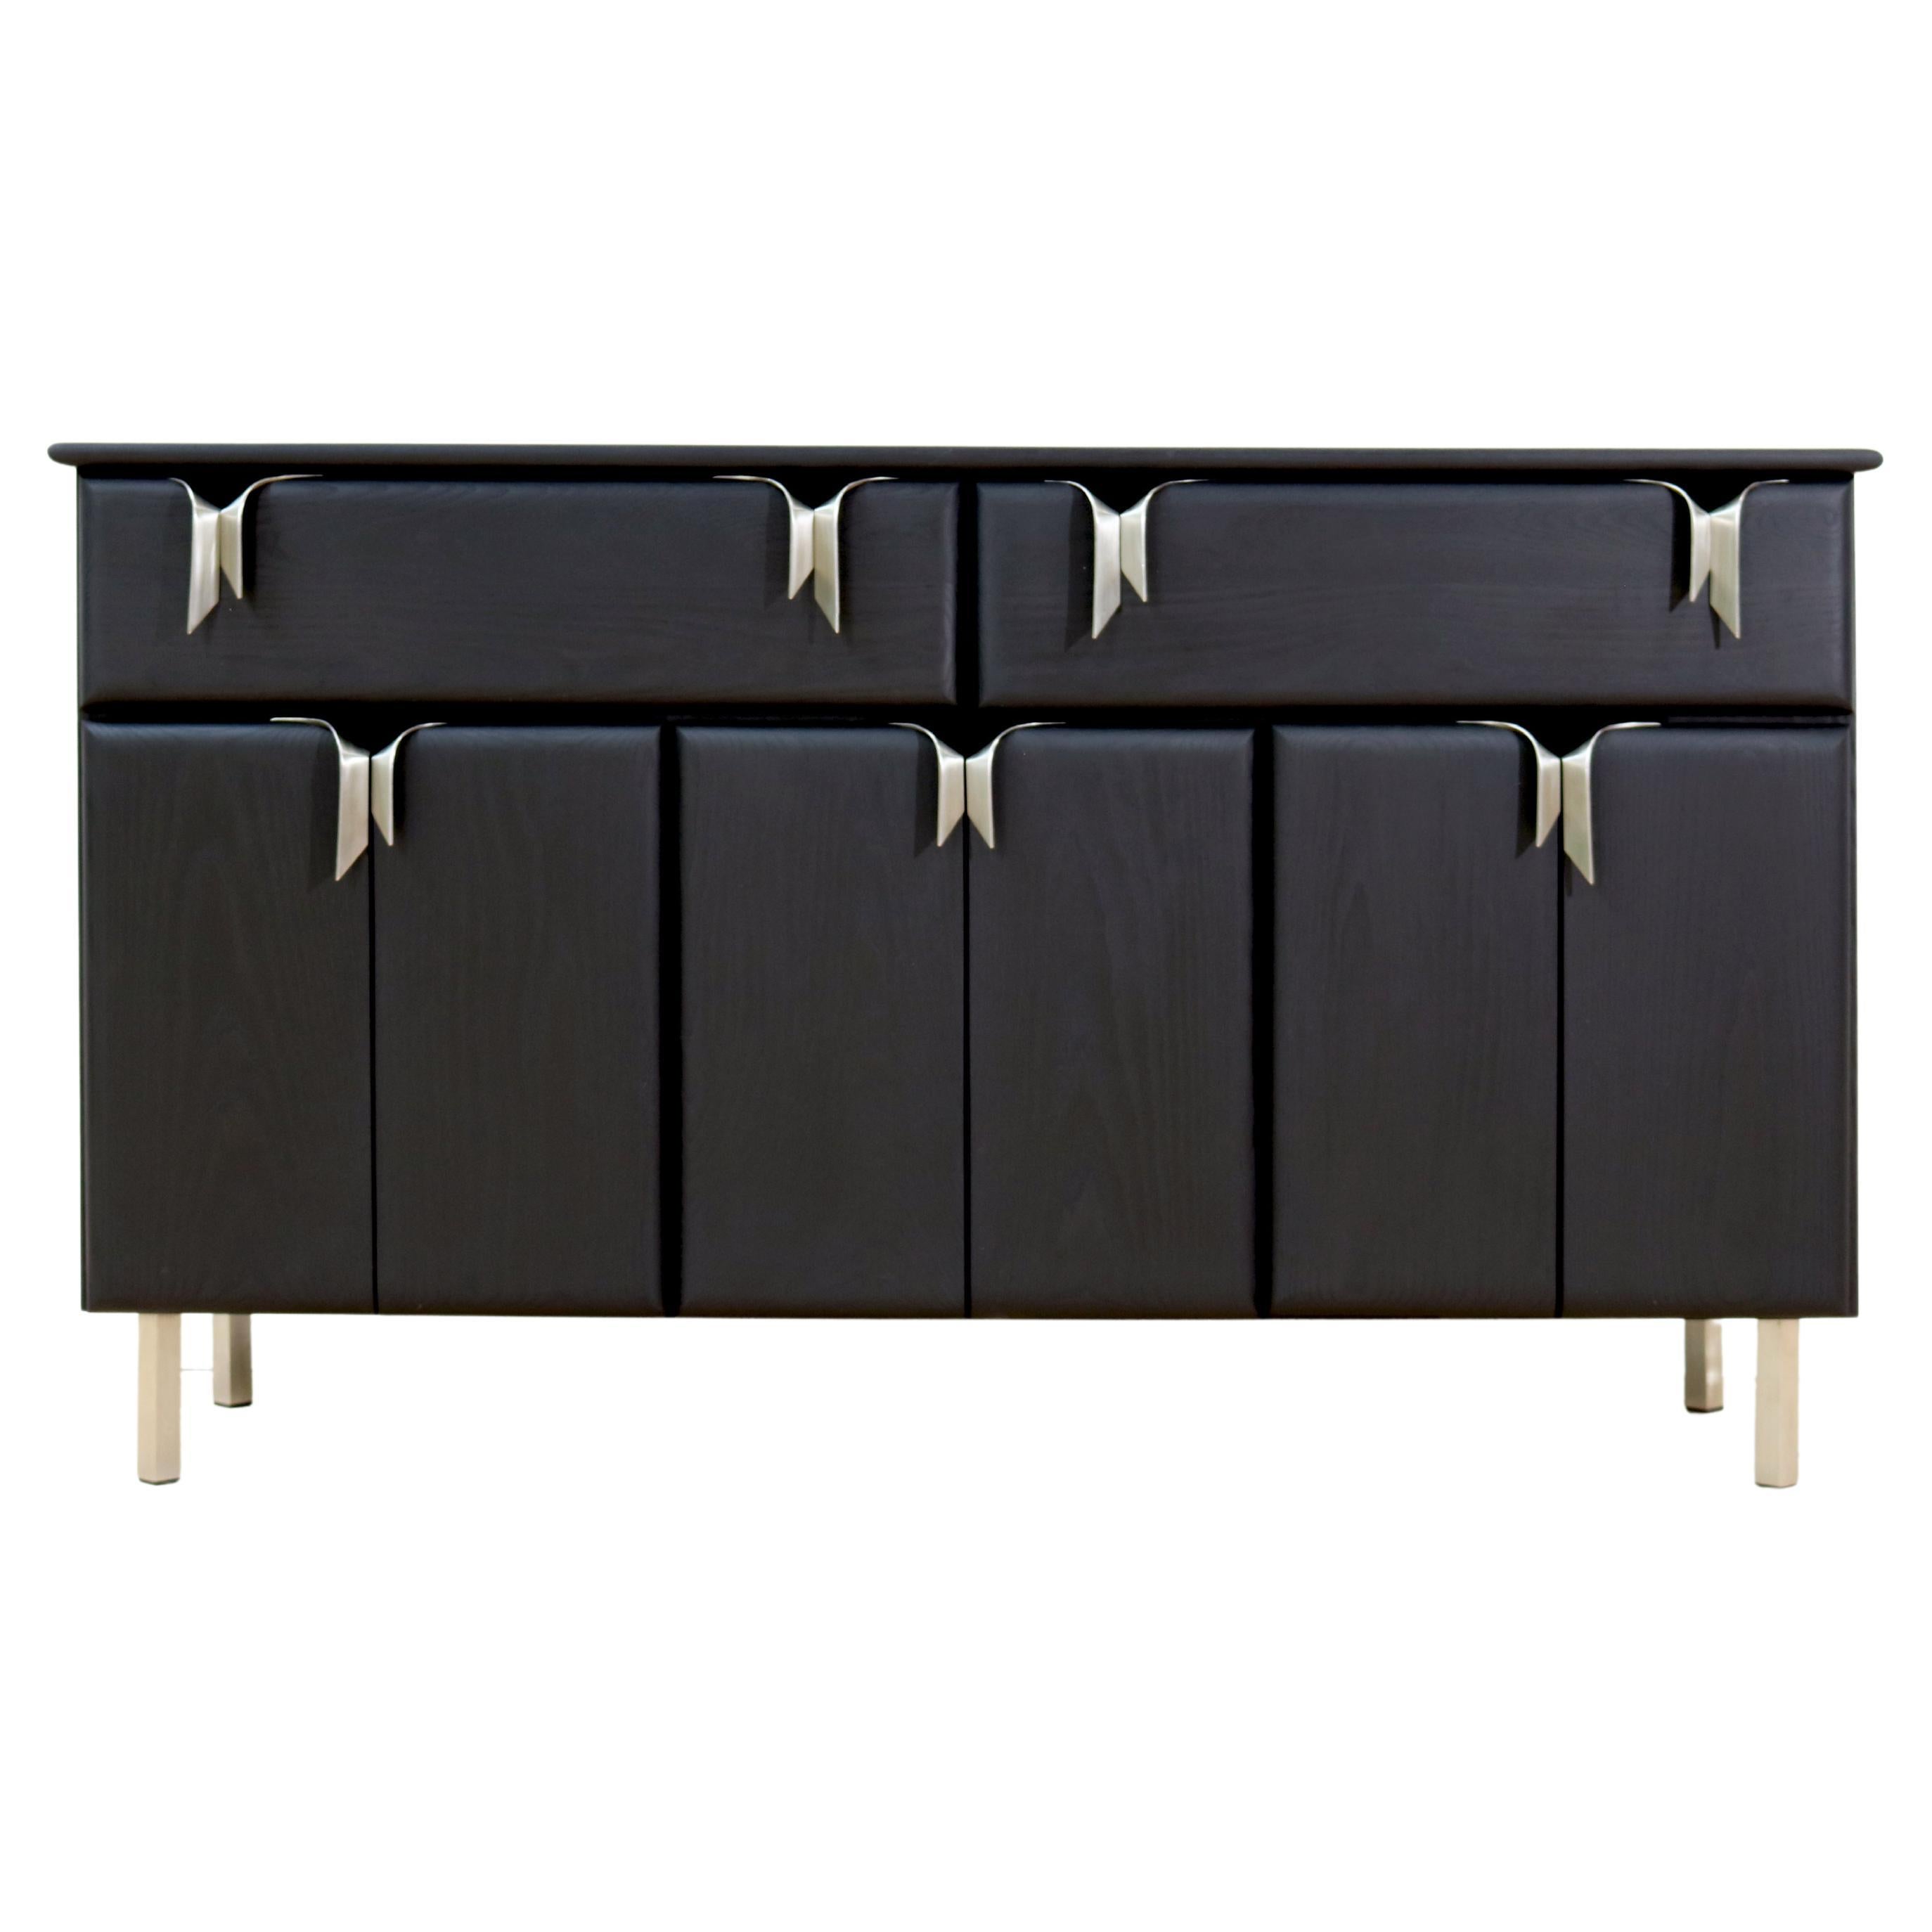 Ribbon Console - Black Ash Wood with Silver Hardware by Debra Folz